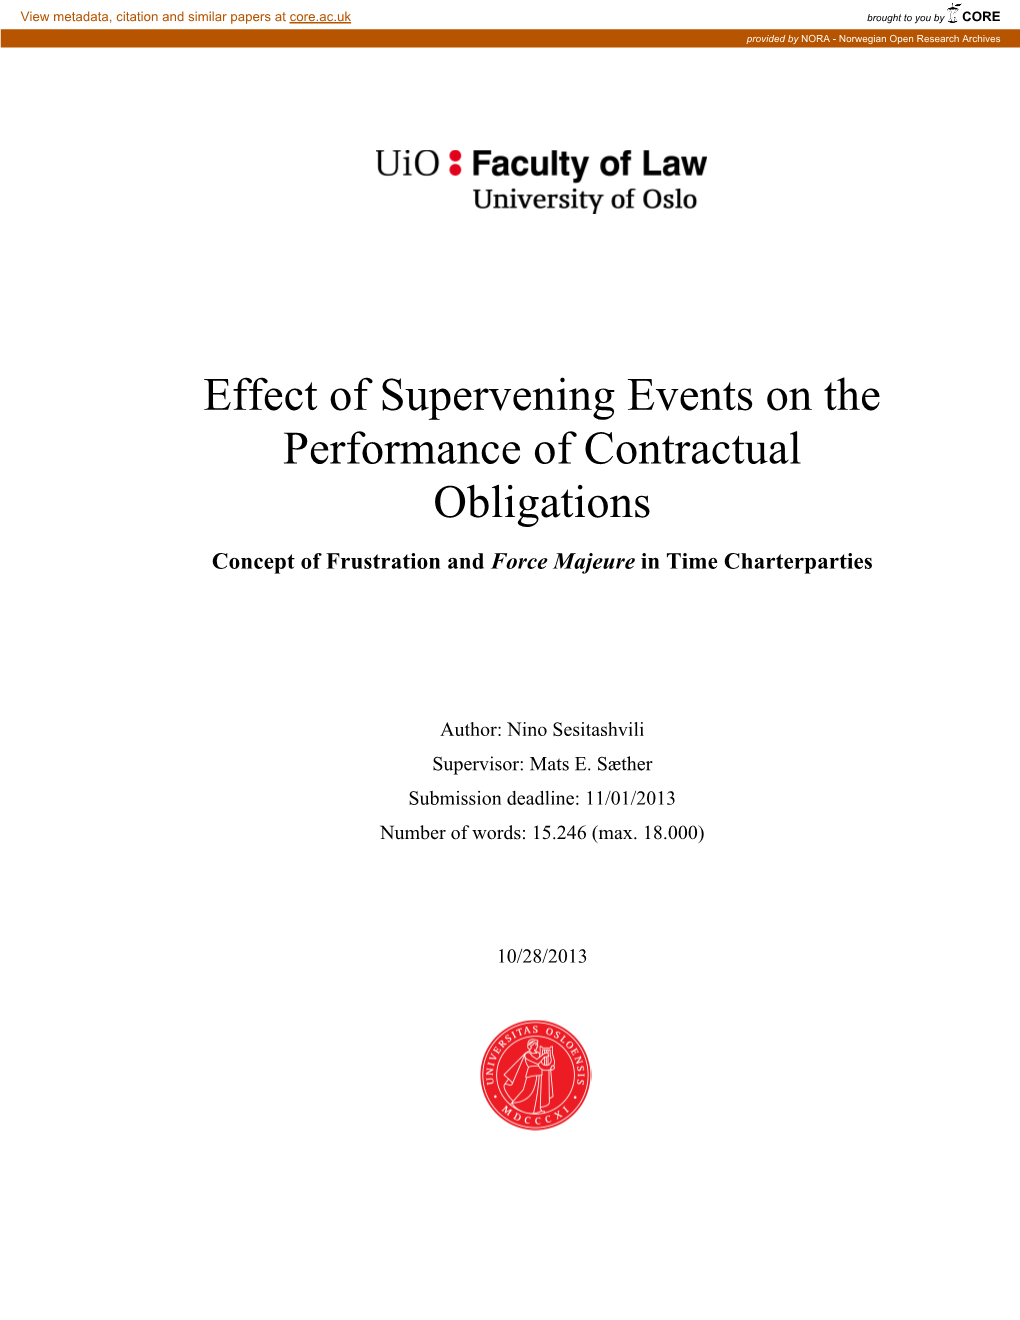 Effect of Supervening Events on the Performance of Contractual Obligations